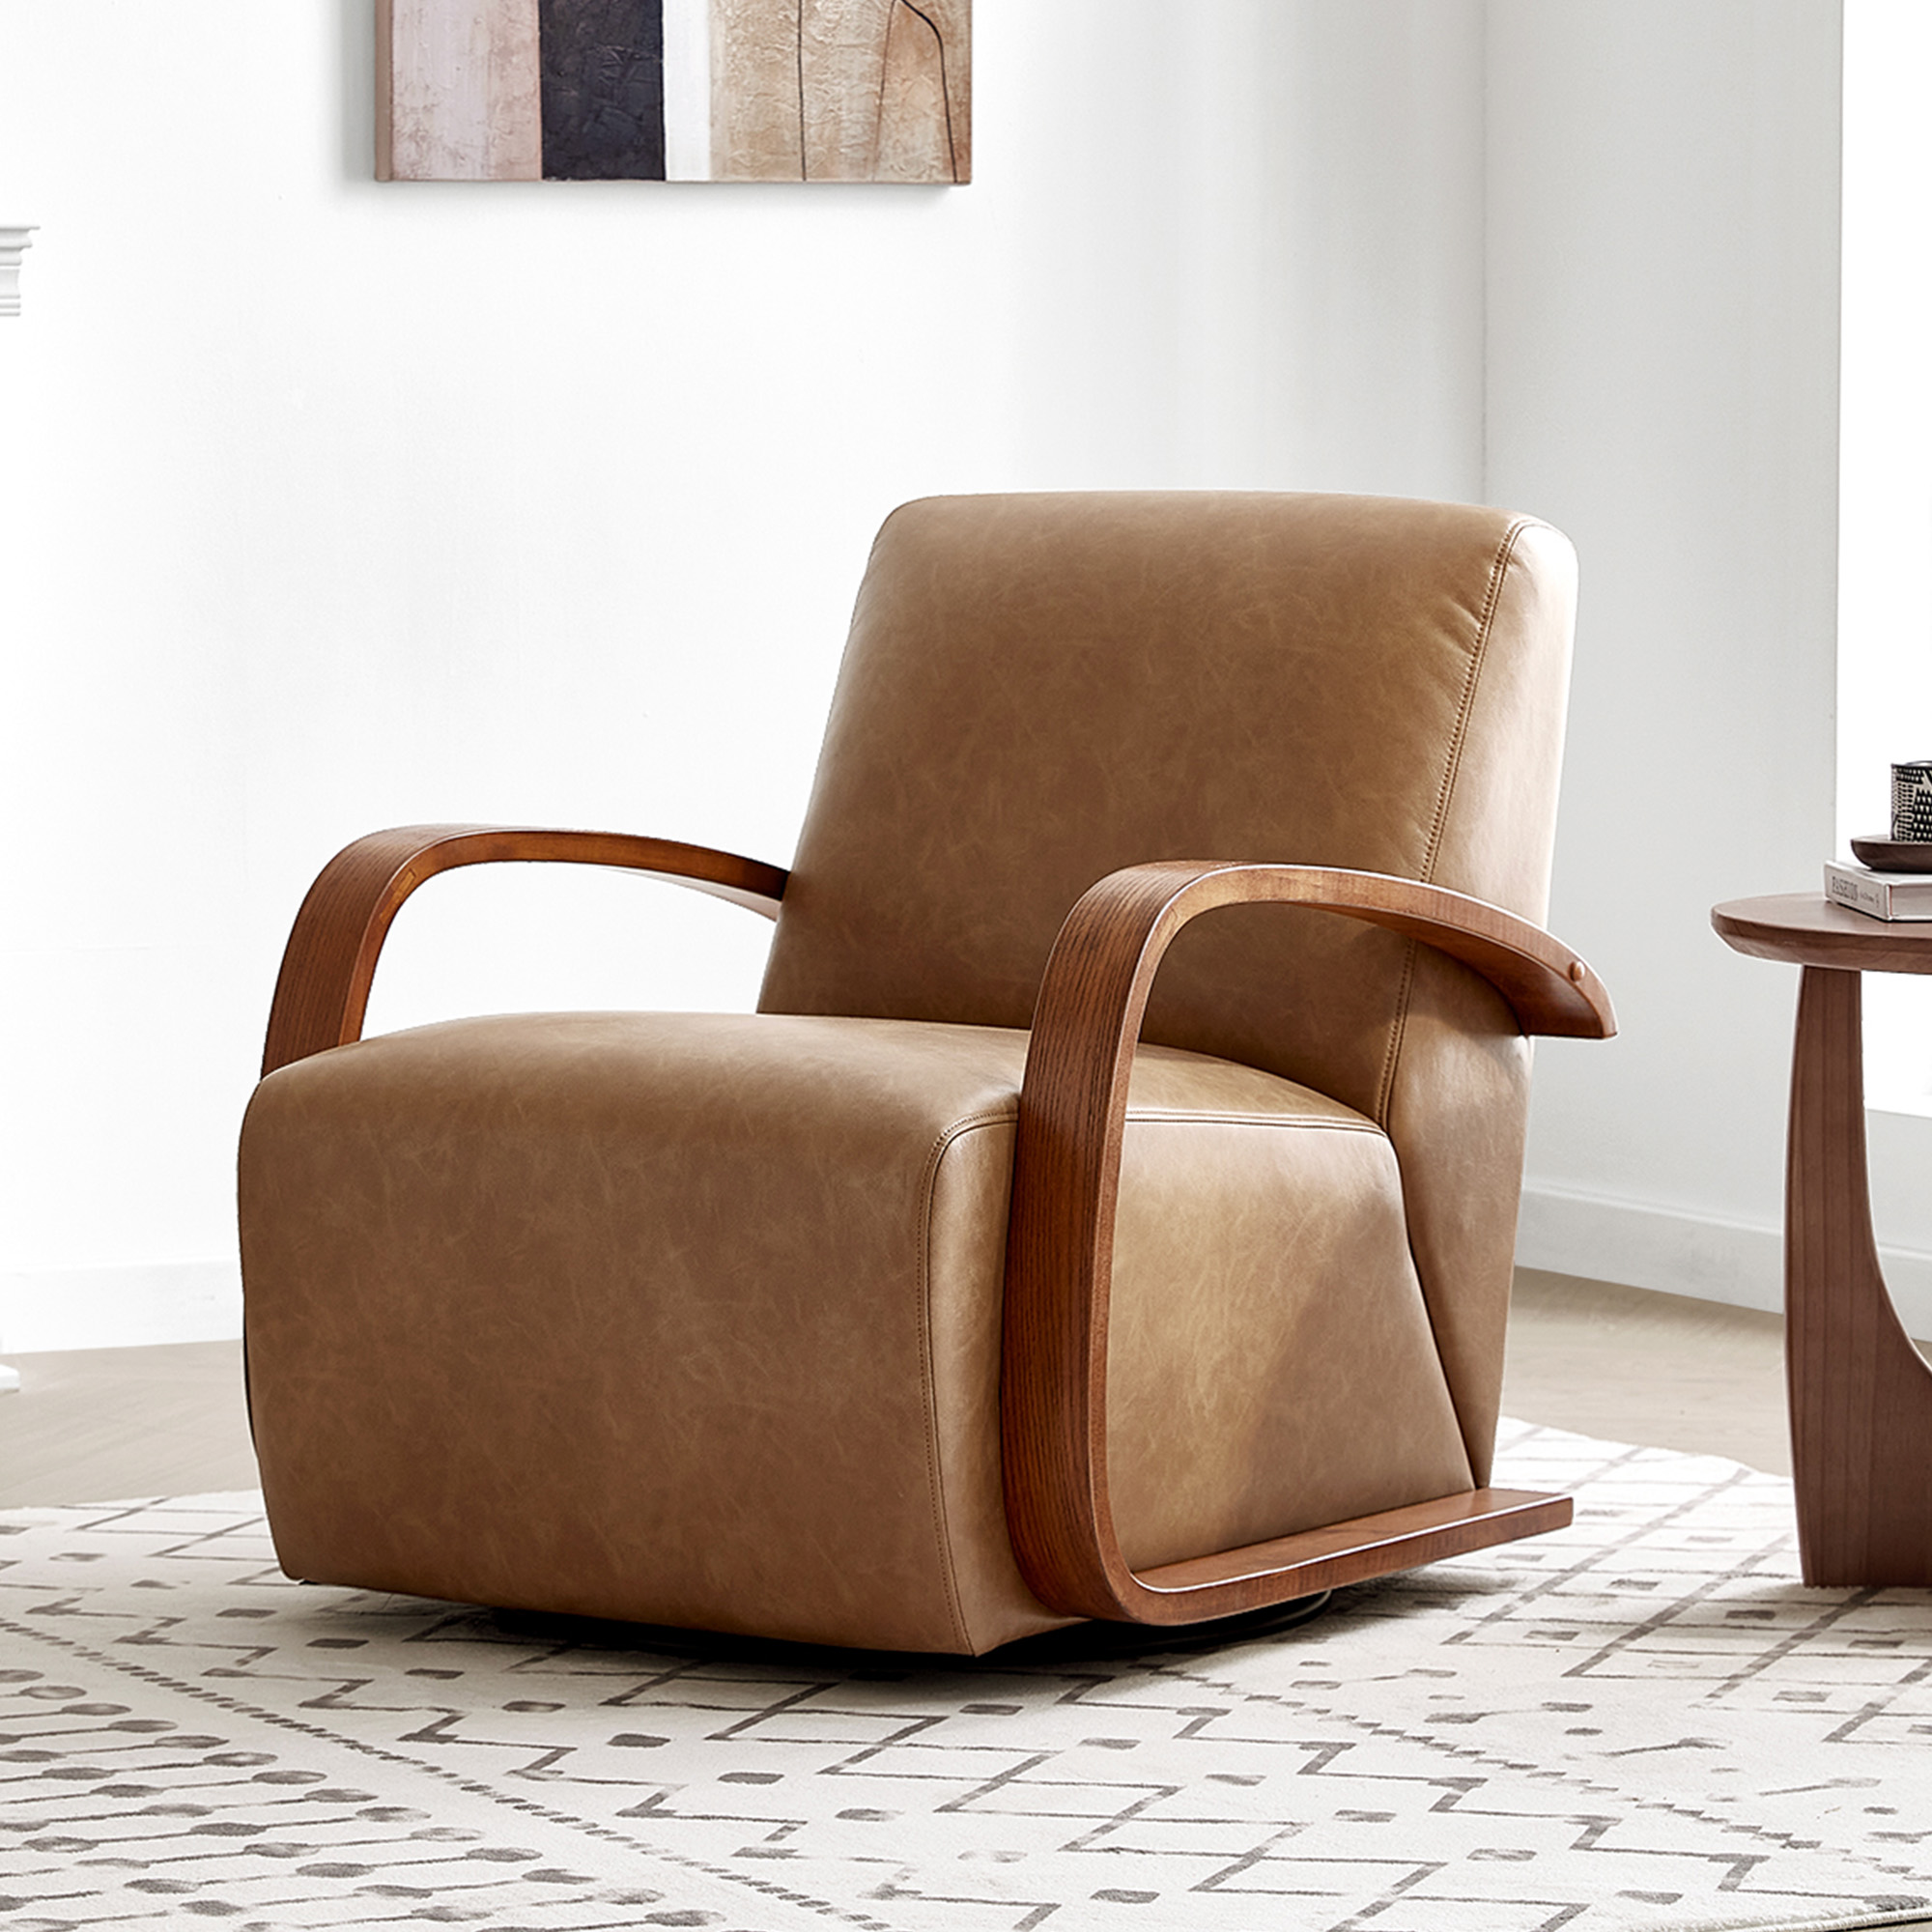 CHITA Swivel Accent Chair with U-shaped Wood Arm for Living Room Beedroom, Cognac Brown & Walnut - image 1 of 14